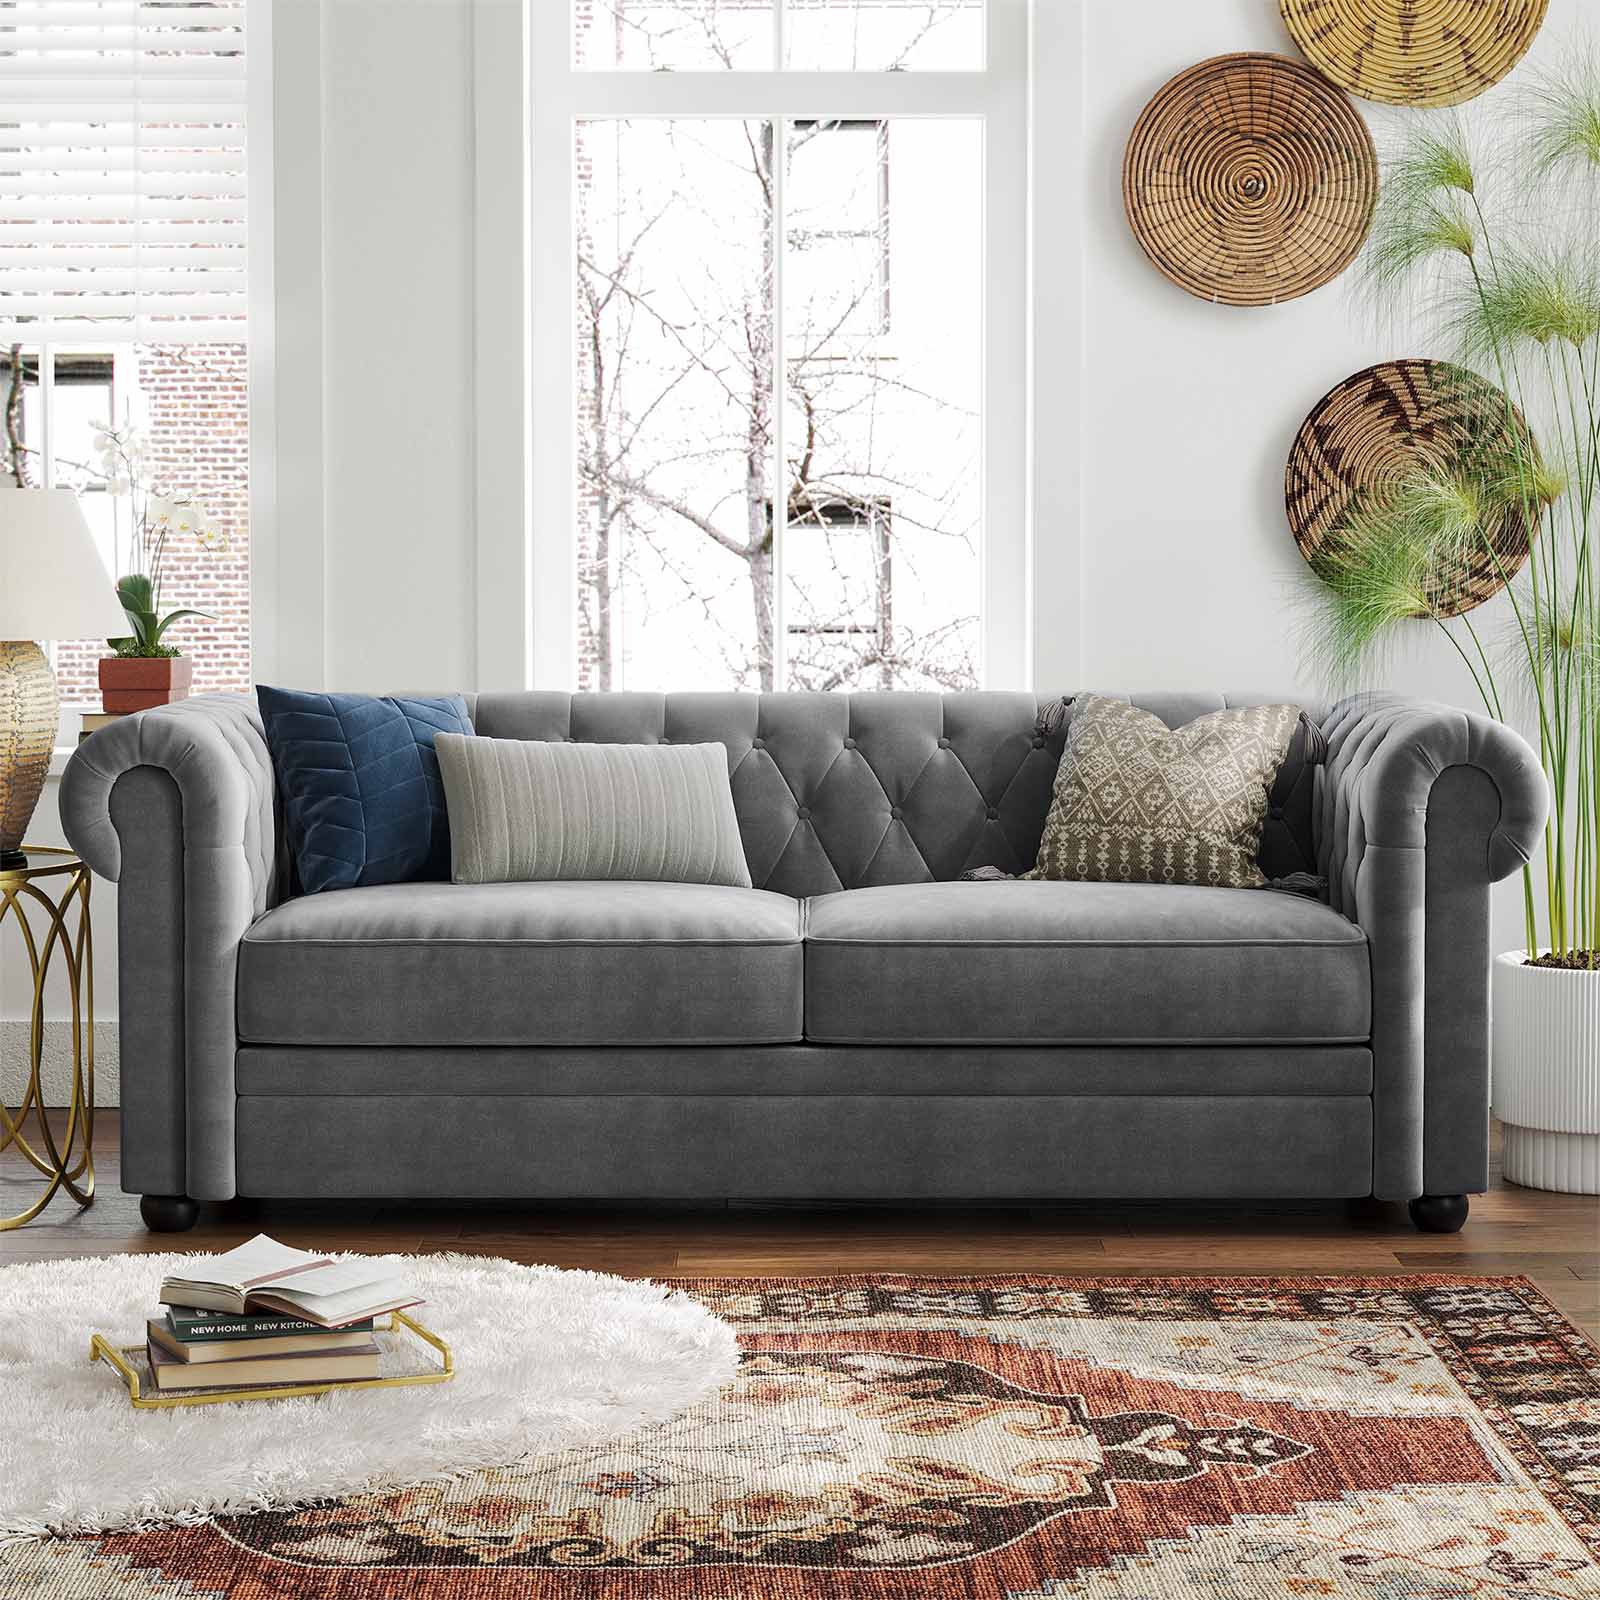 VASAGLE Sofa, Chesterfield Couch for Living Room, Velvet Fabric, for ...